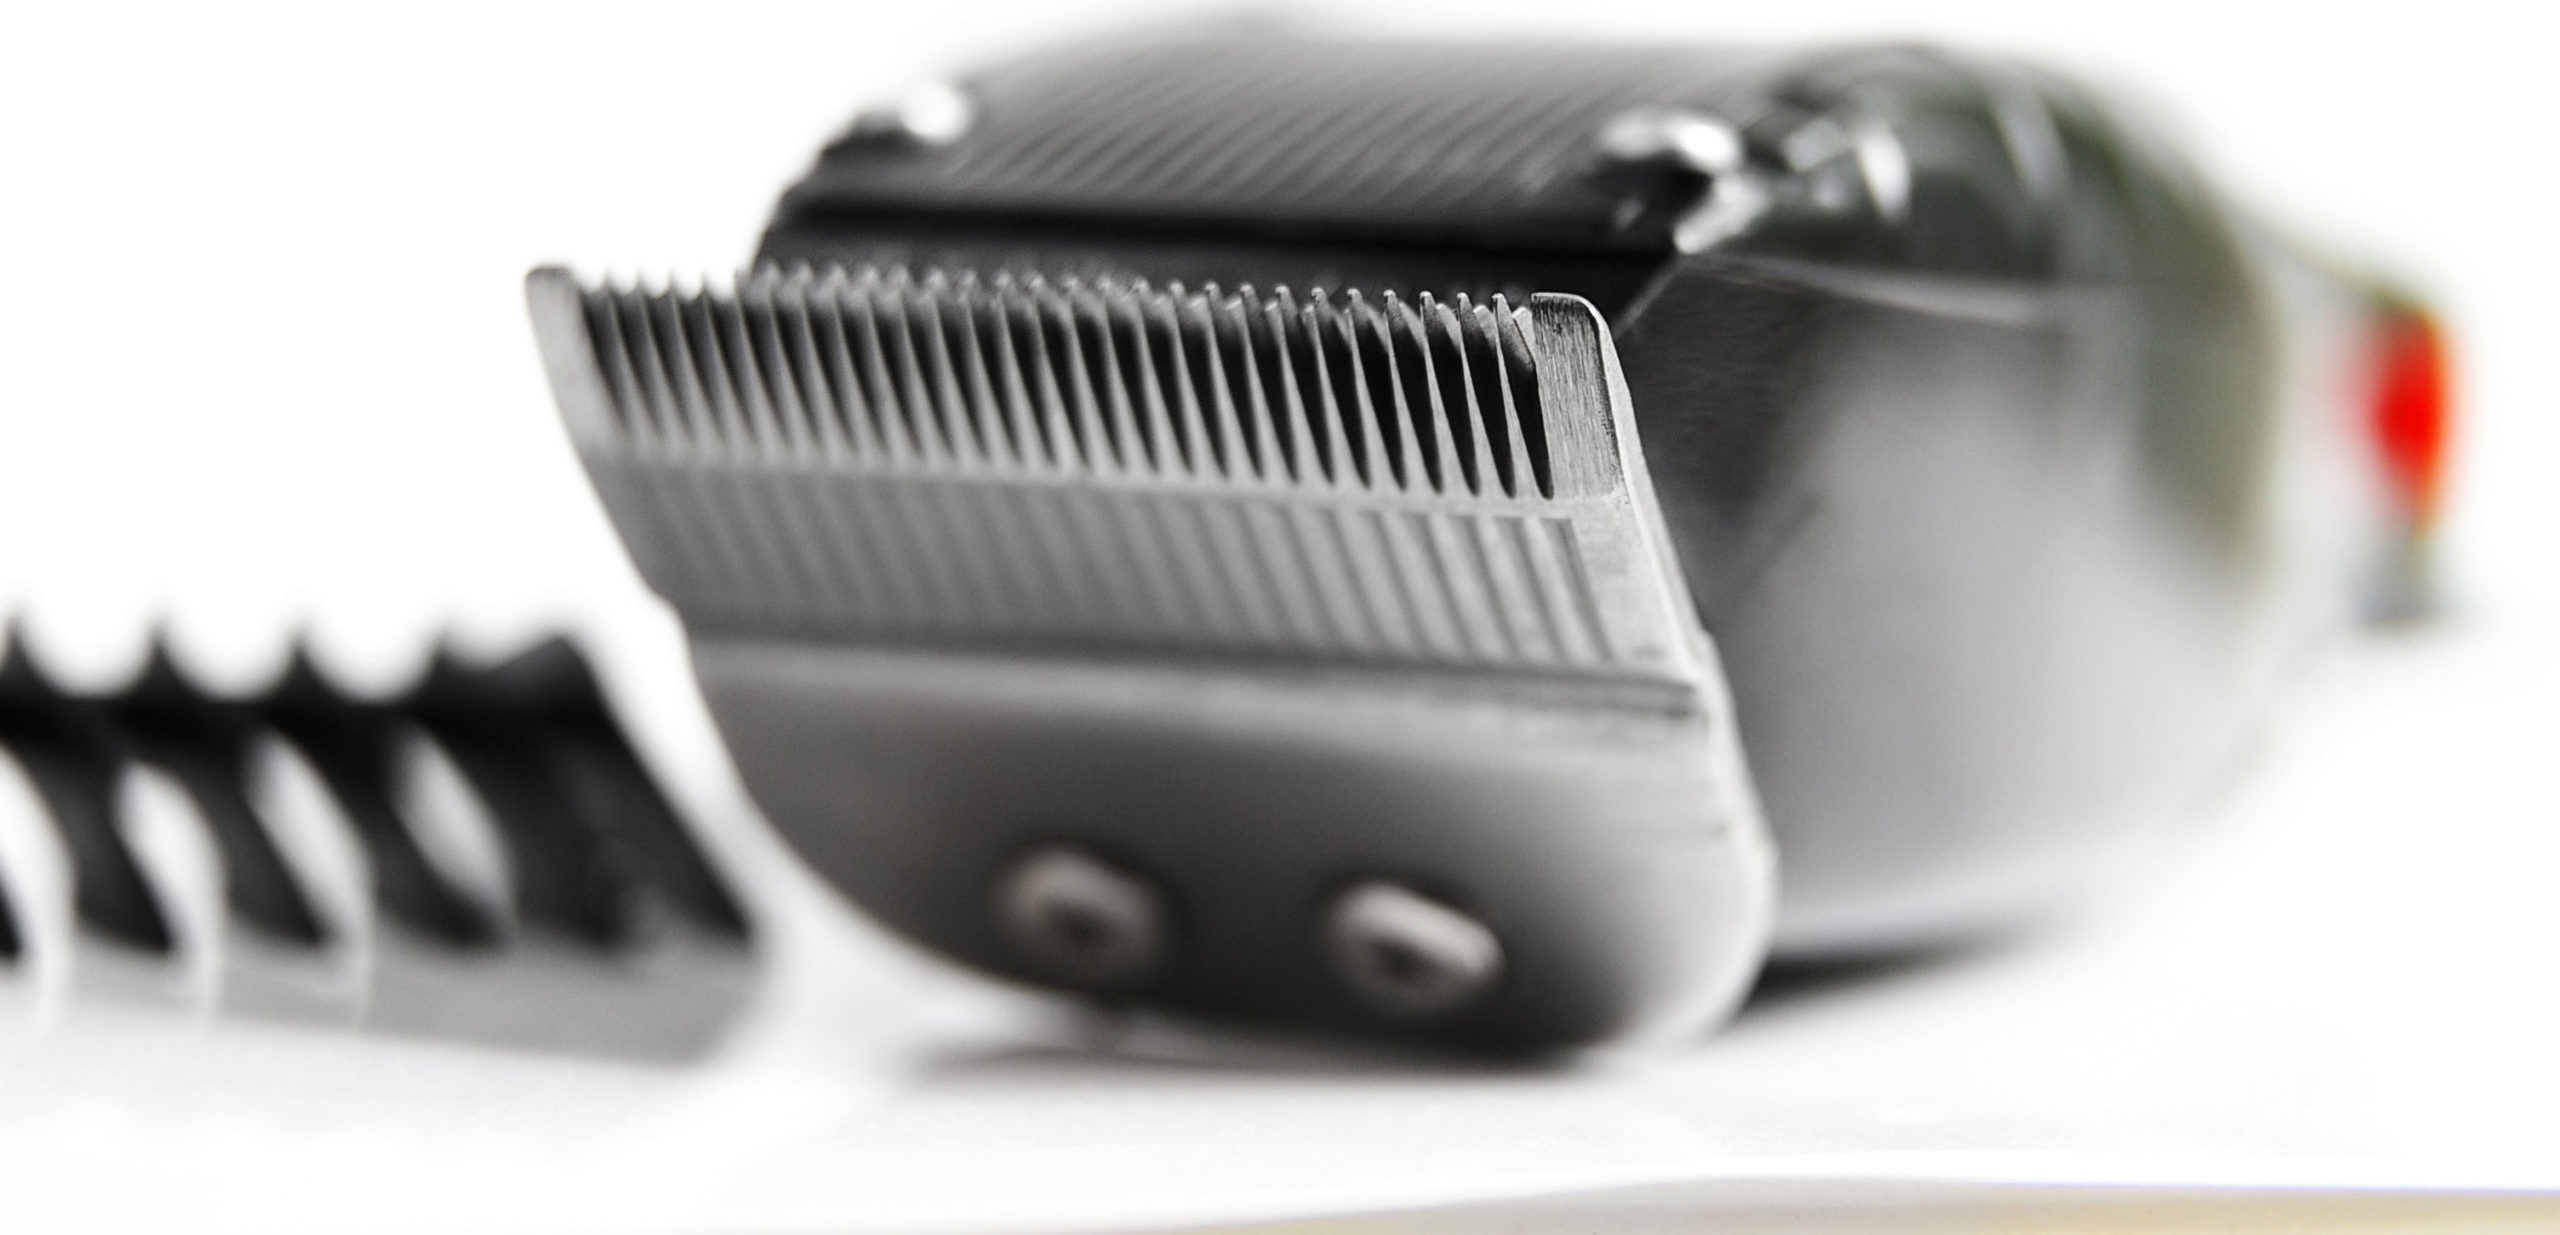 5 Reasons Your Clipper Blades Won't Cut - Wahl UK